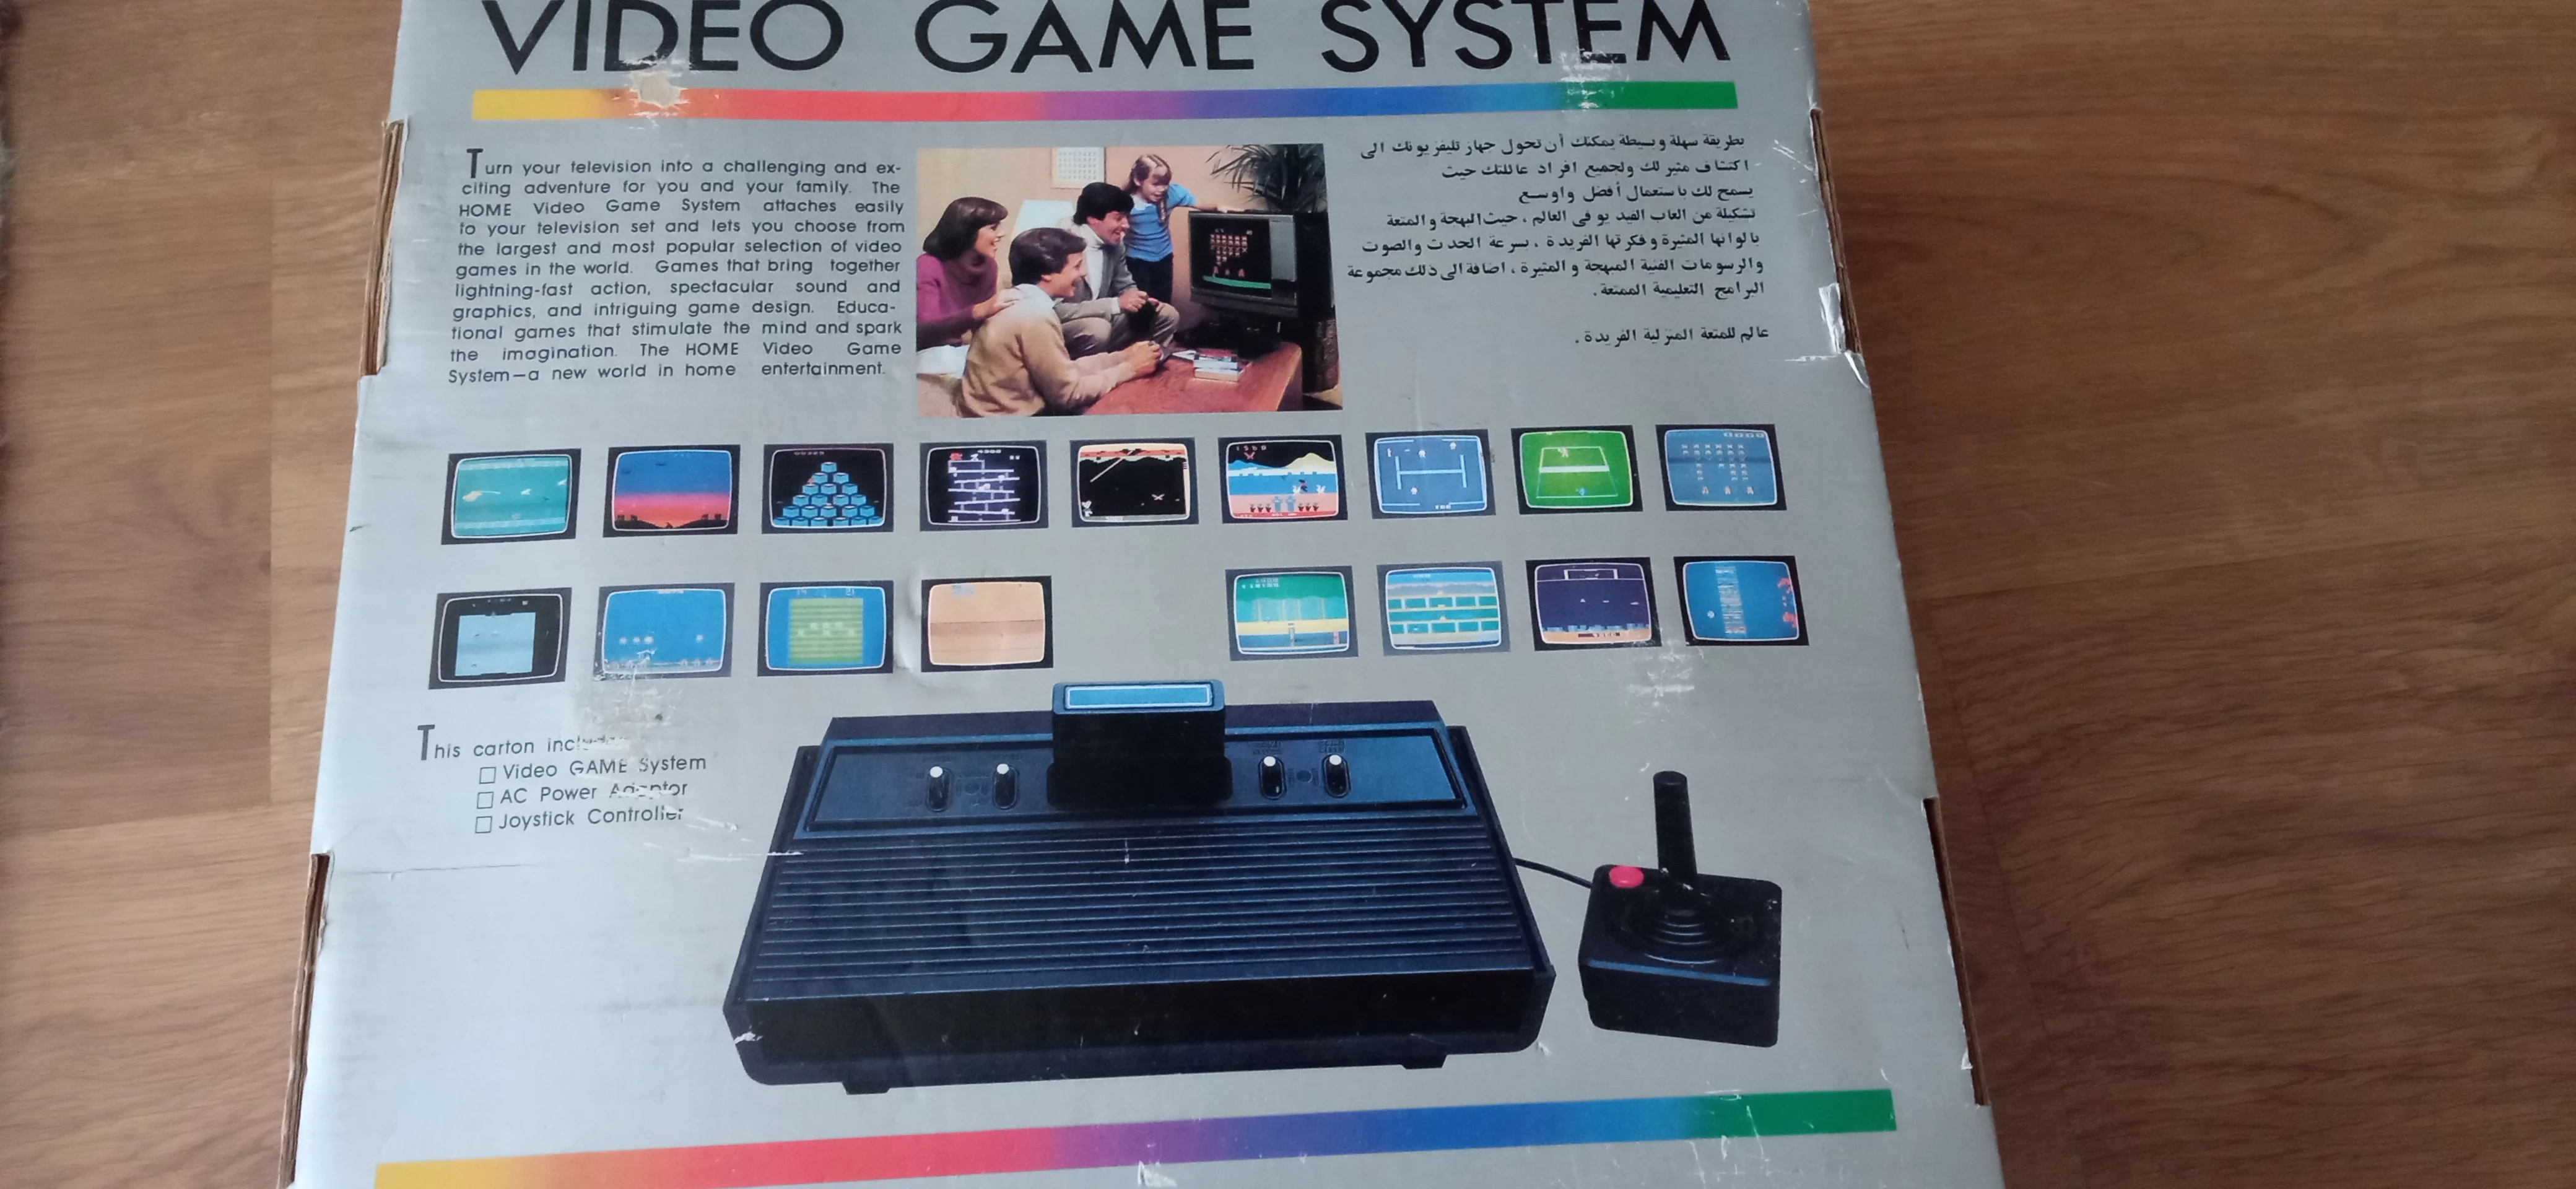  Video Game System 2600 Console